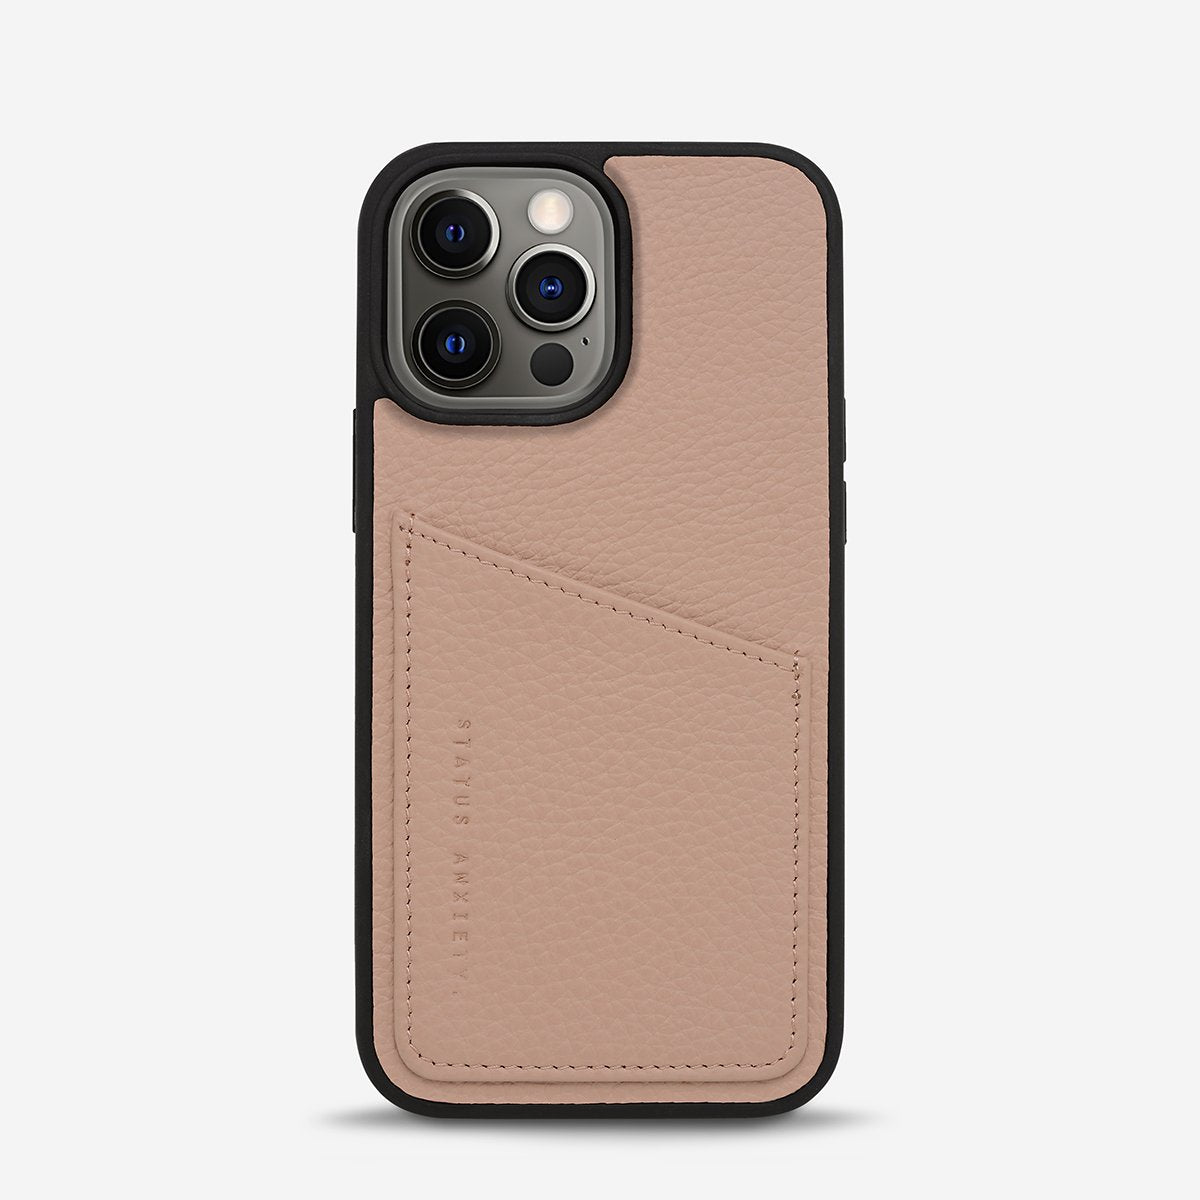 Who's Who Leather iPhone Case in Dusty Pink